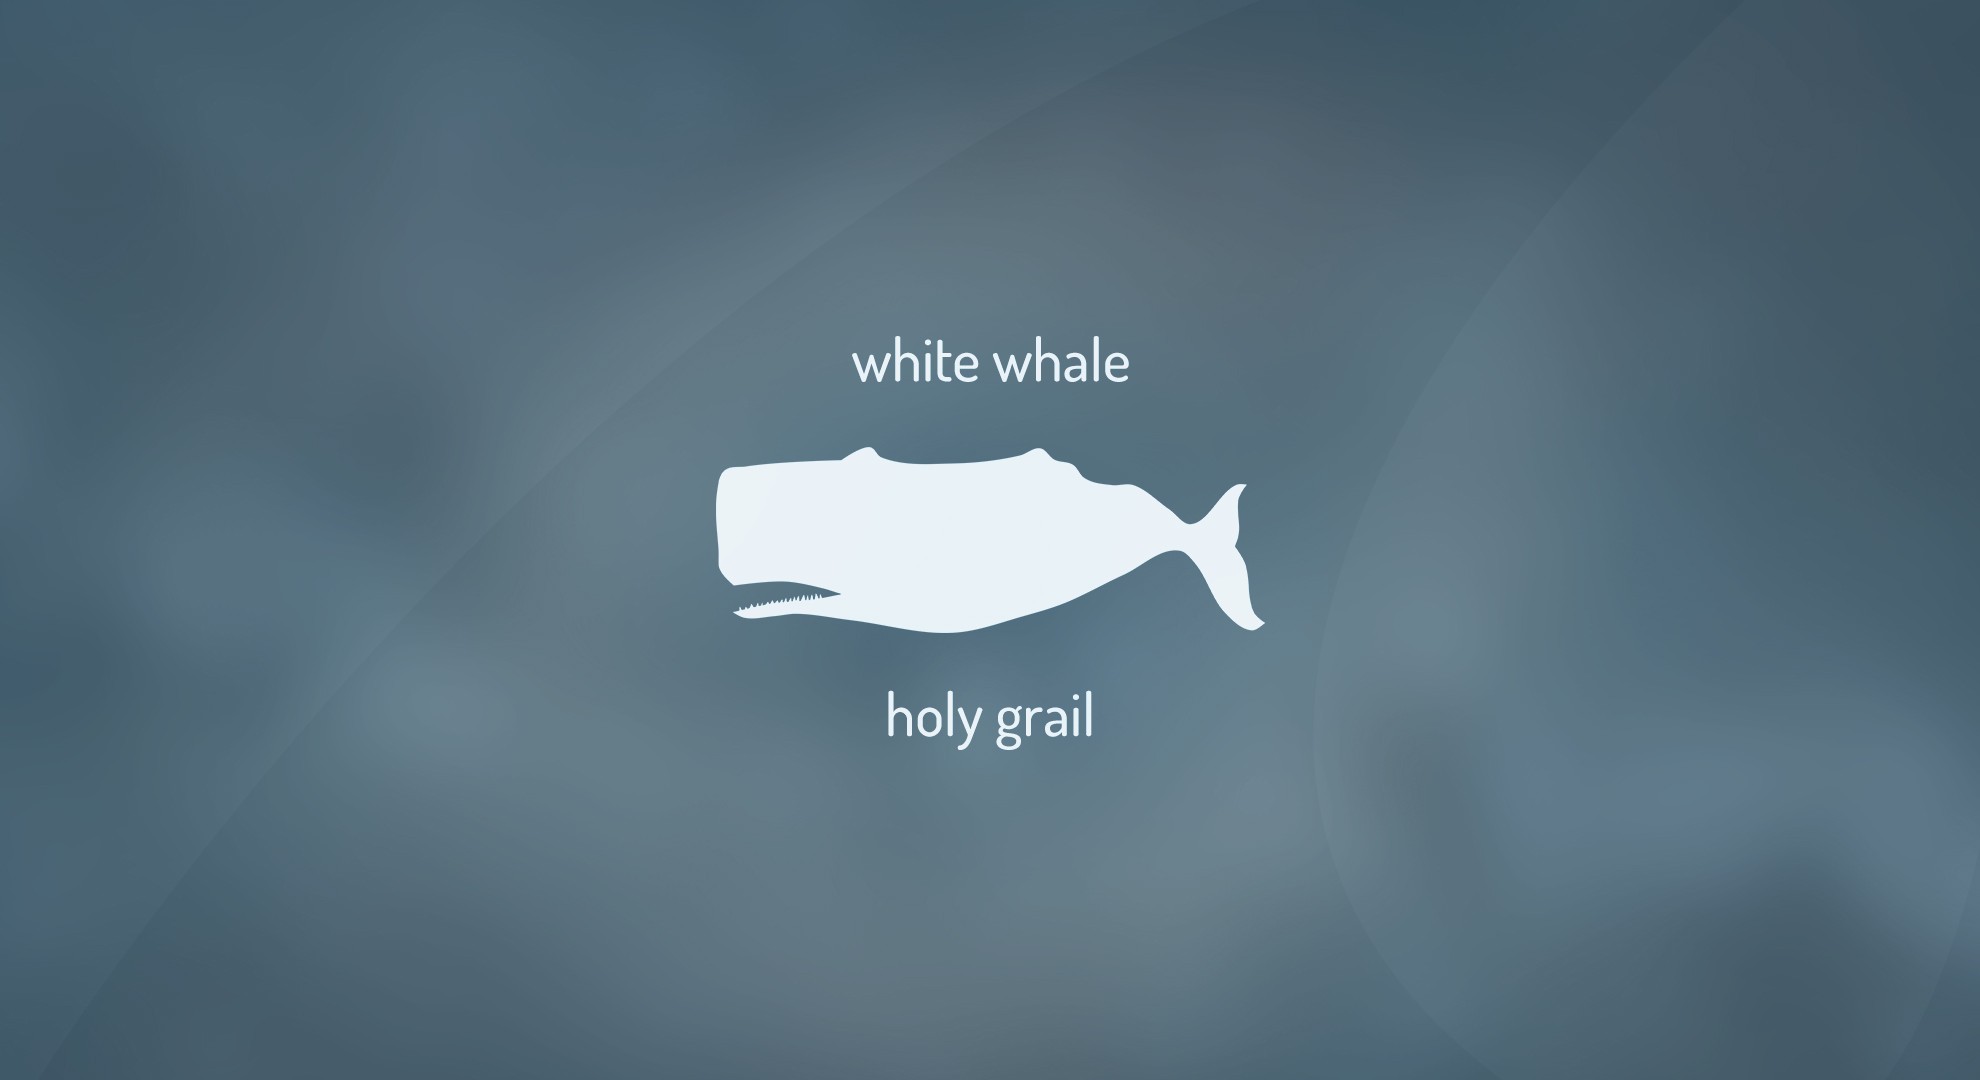 General 1980x1080 whale minimalism Mastodon literature band Book characters simple background text animals